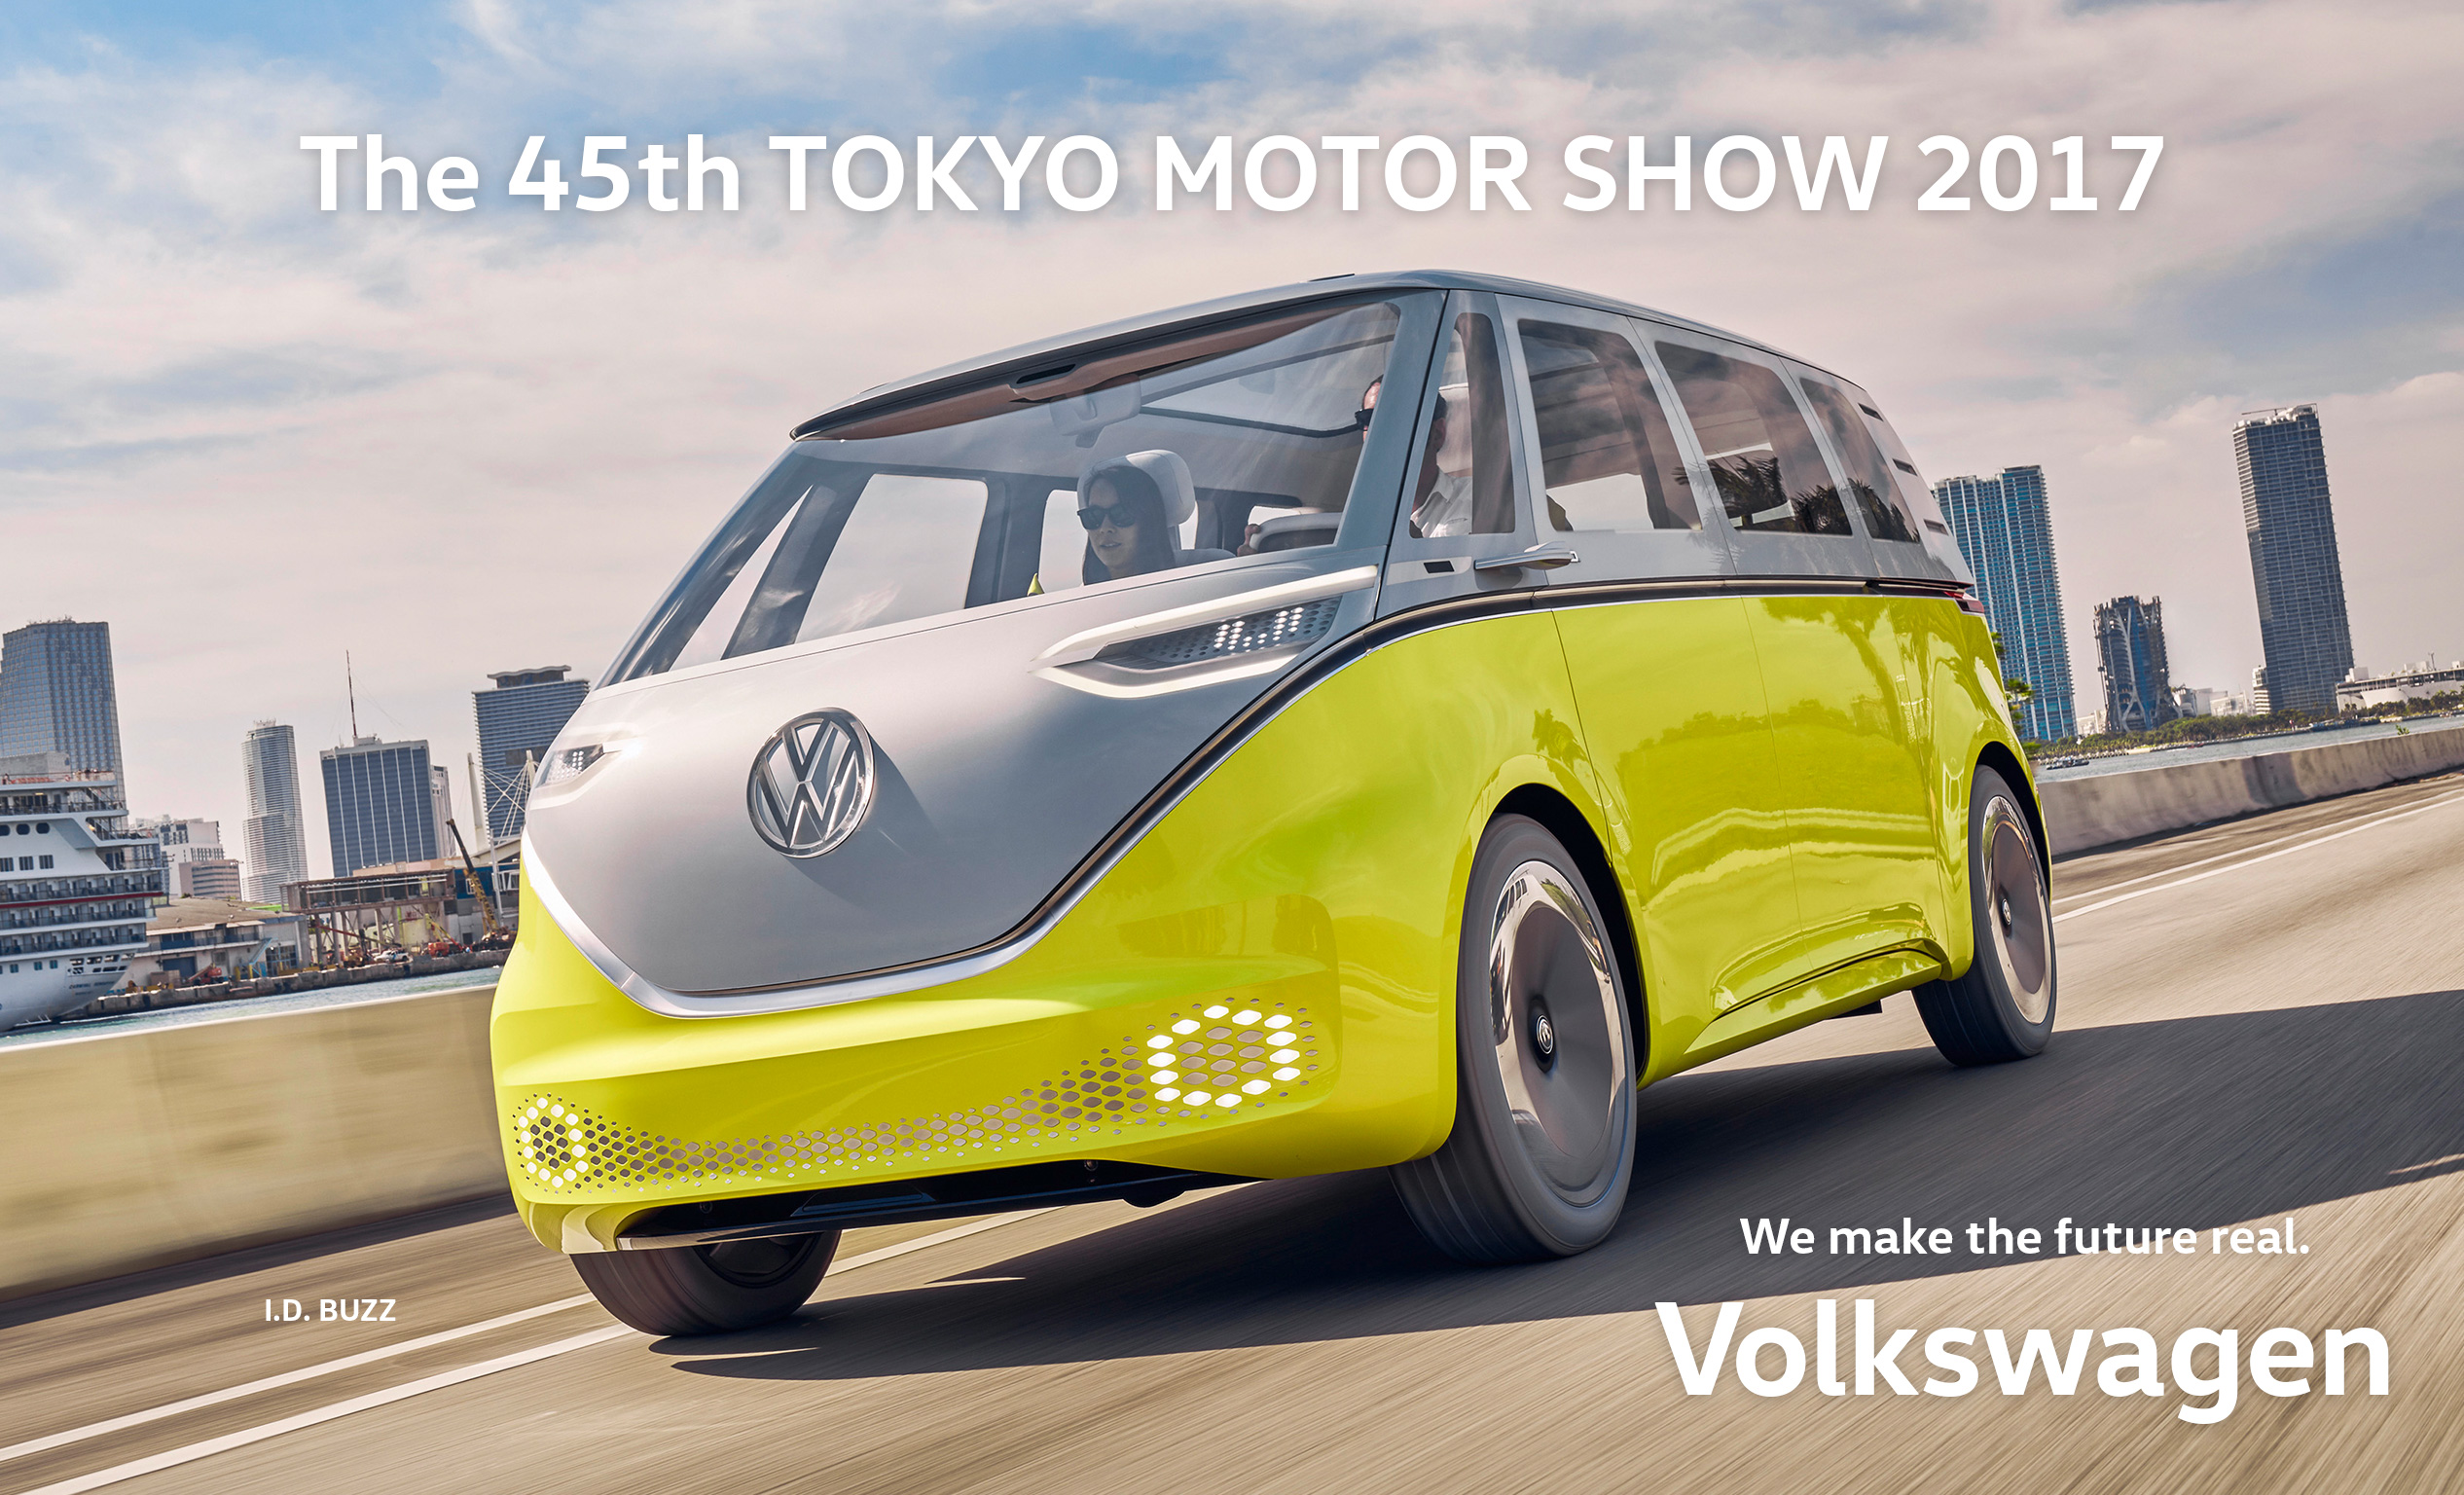 The 45th TOKYO MOTOR SHOW 2017 We make the future real. Volkswagen